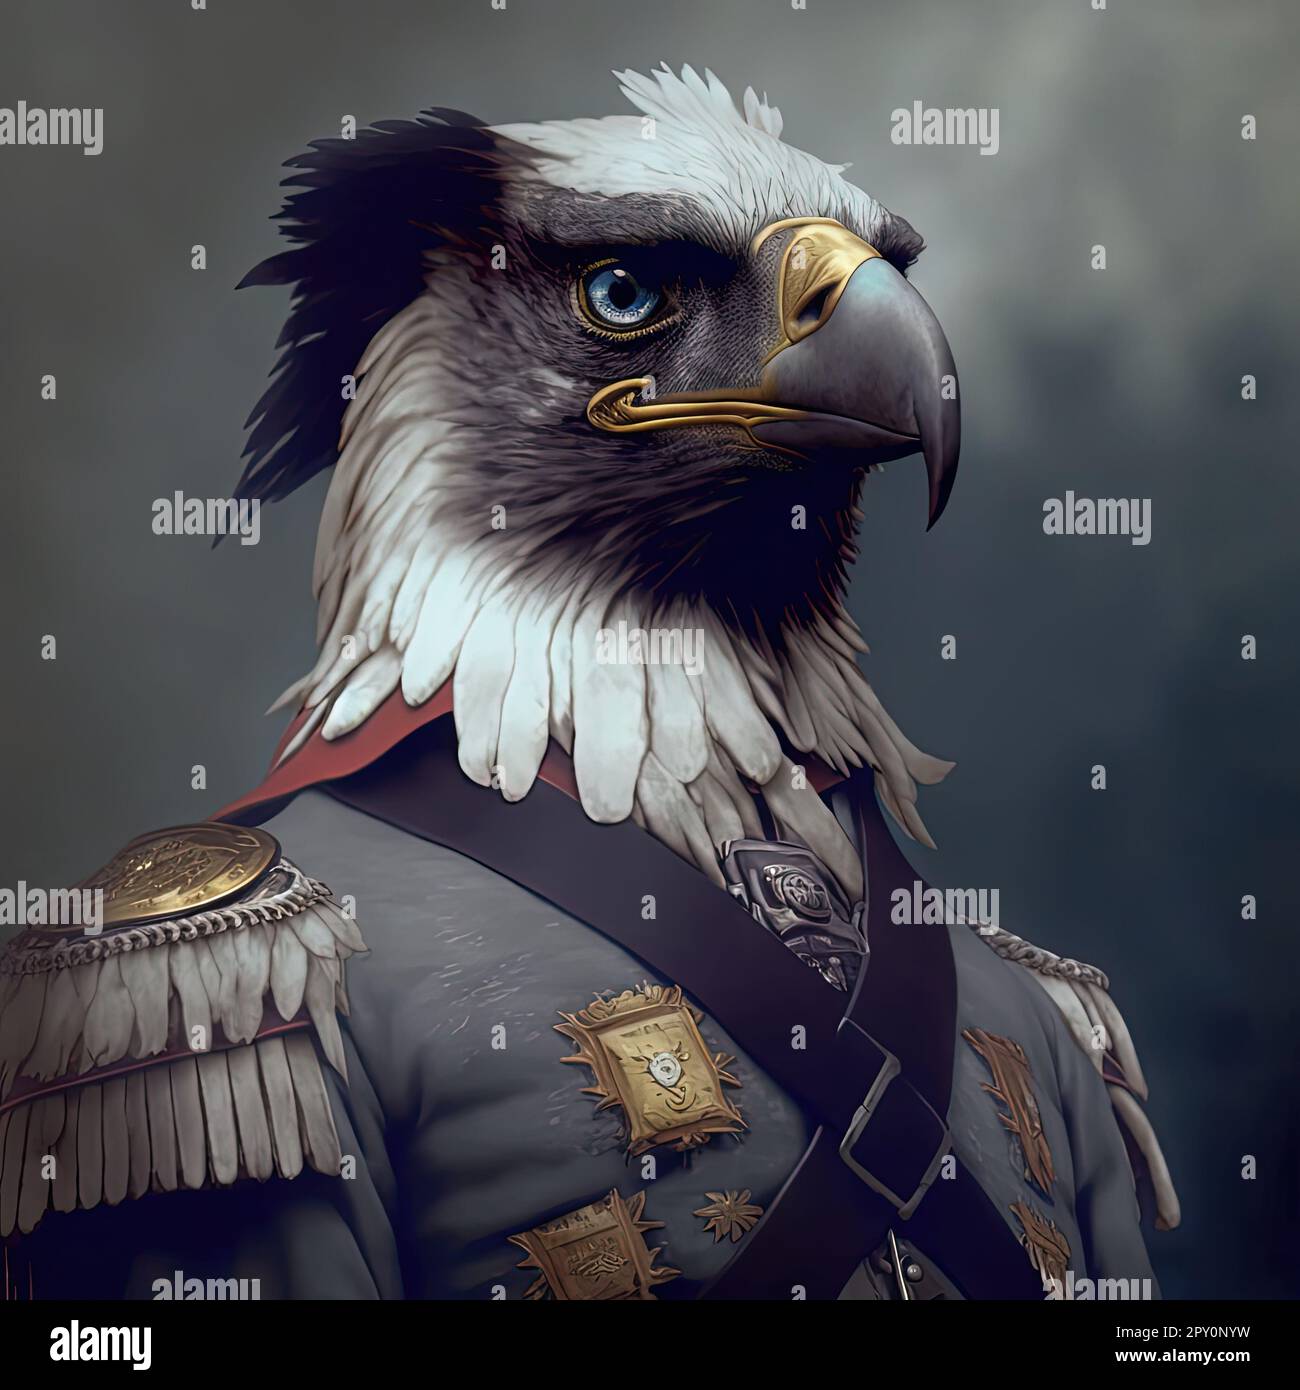 A powerful depiction of an eagle in full military attire, standing guard with unwavering determination. The intricate details of the feathers and unif Stock Photo